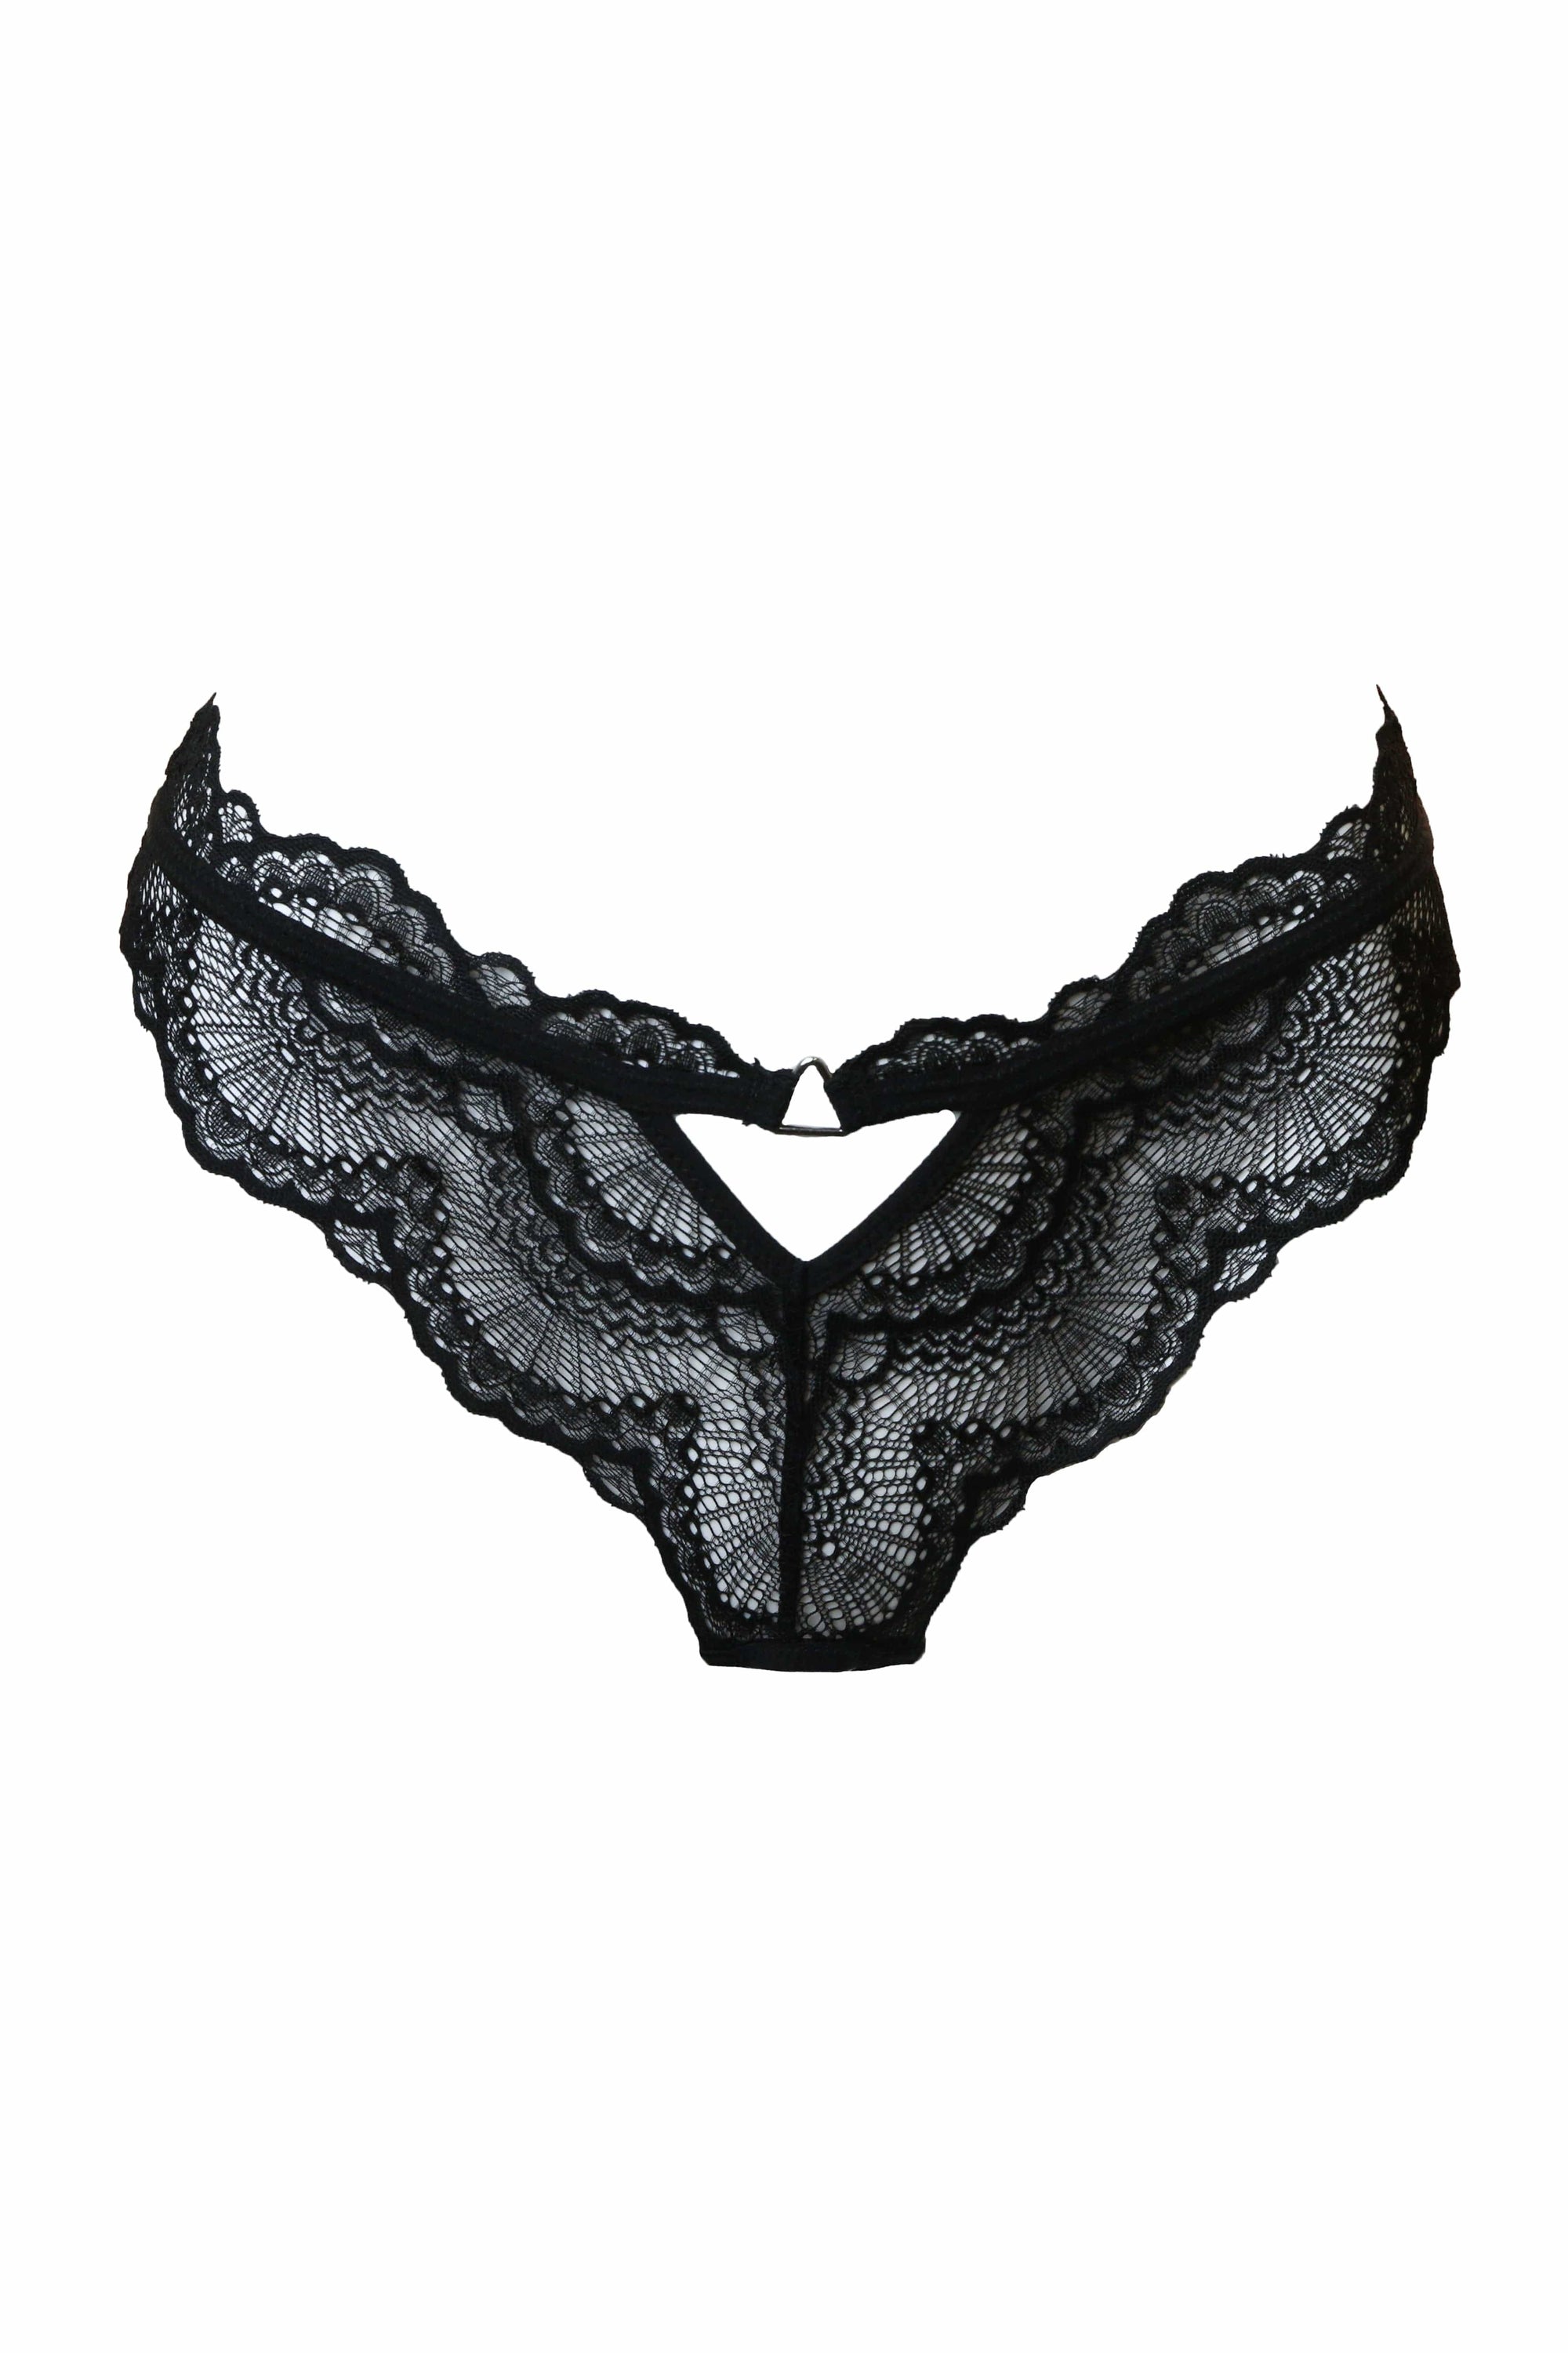 Thistle & Spire Lingerie Tagged Panties - Chérie Amour